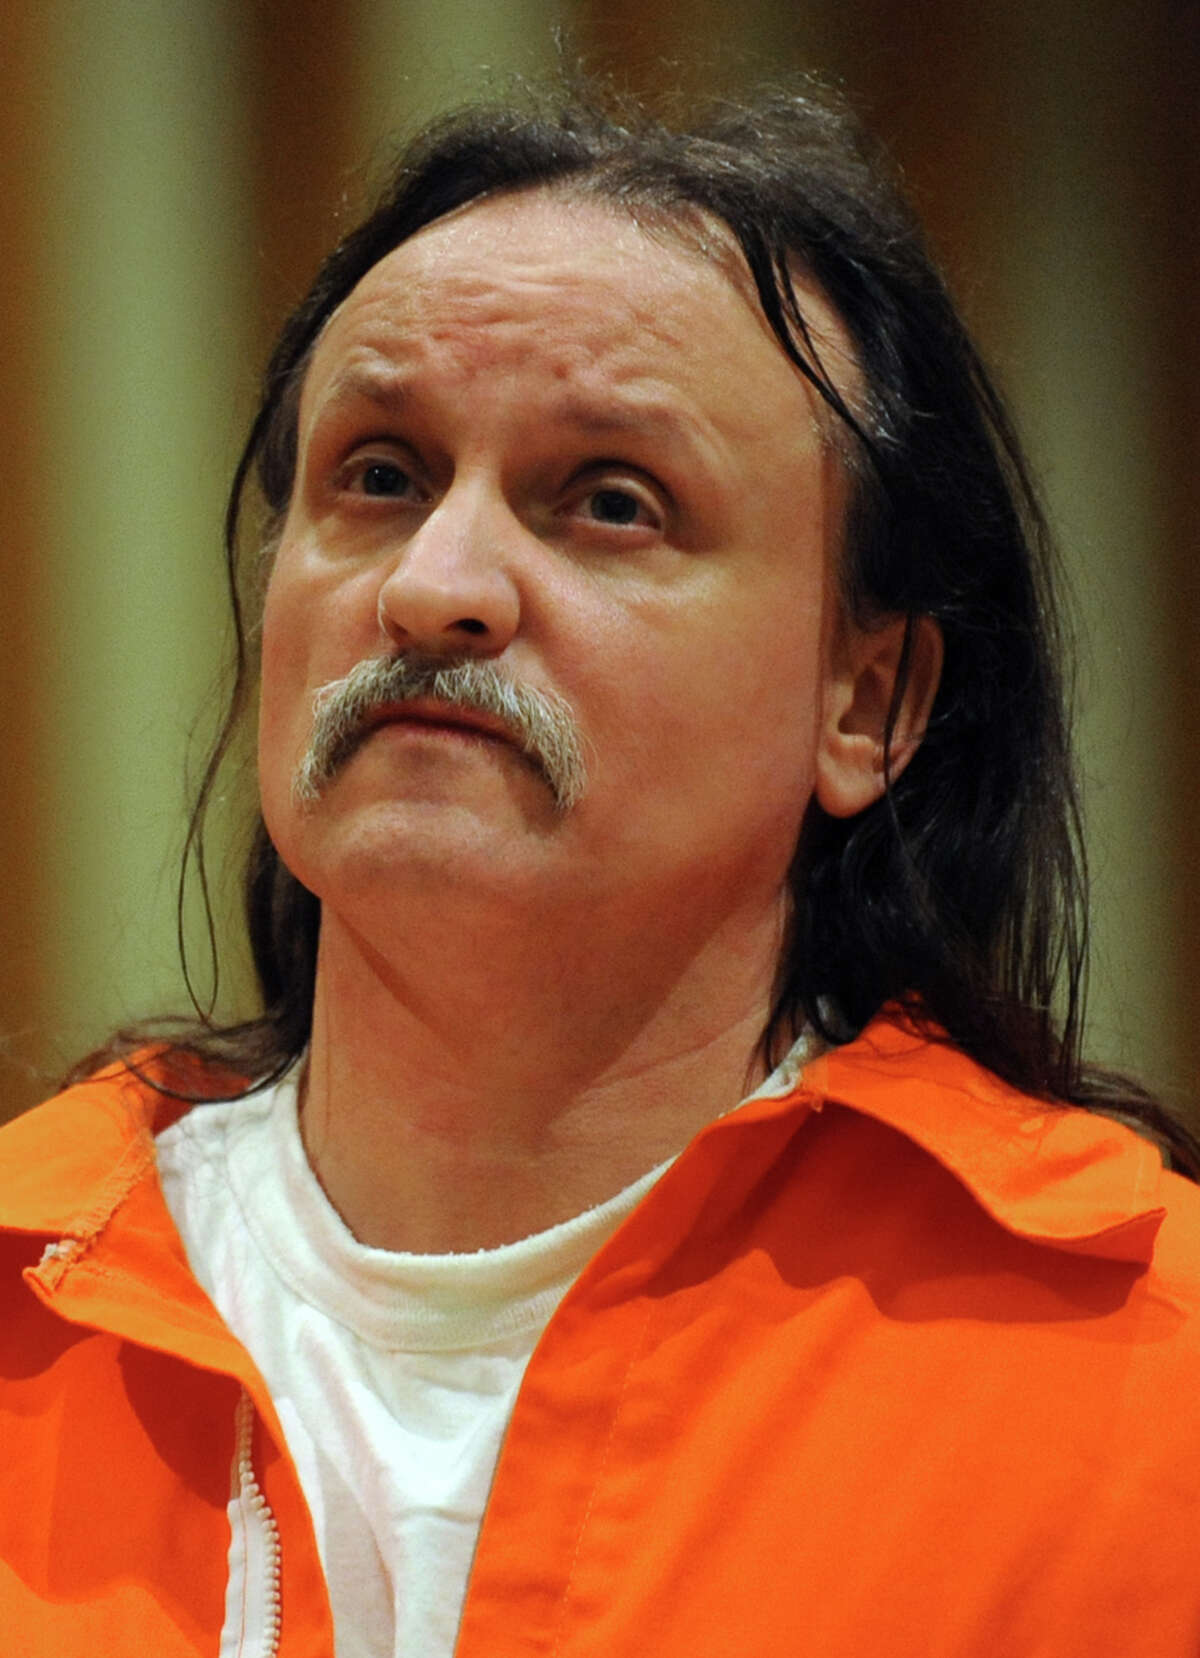 Richard Roszkowski who was convicted for the 2006 murders of his former girlfriend, her 9-year-old daughter and his former roommate.